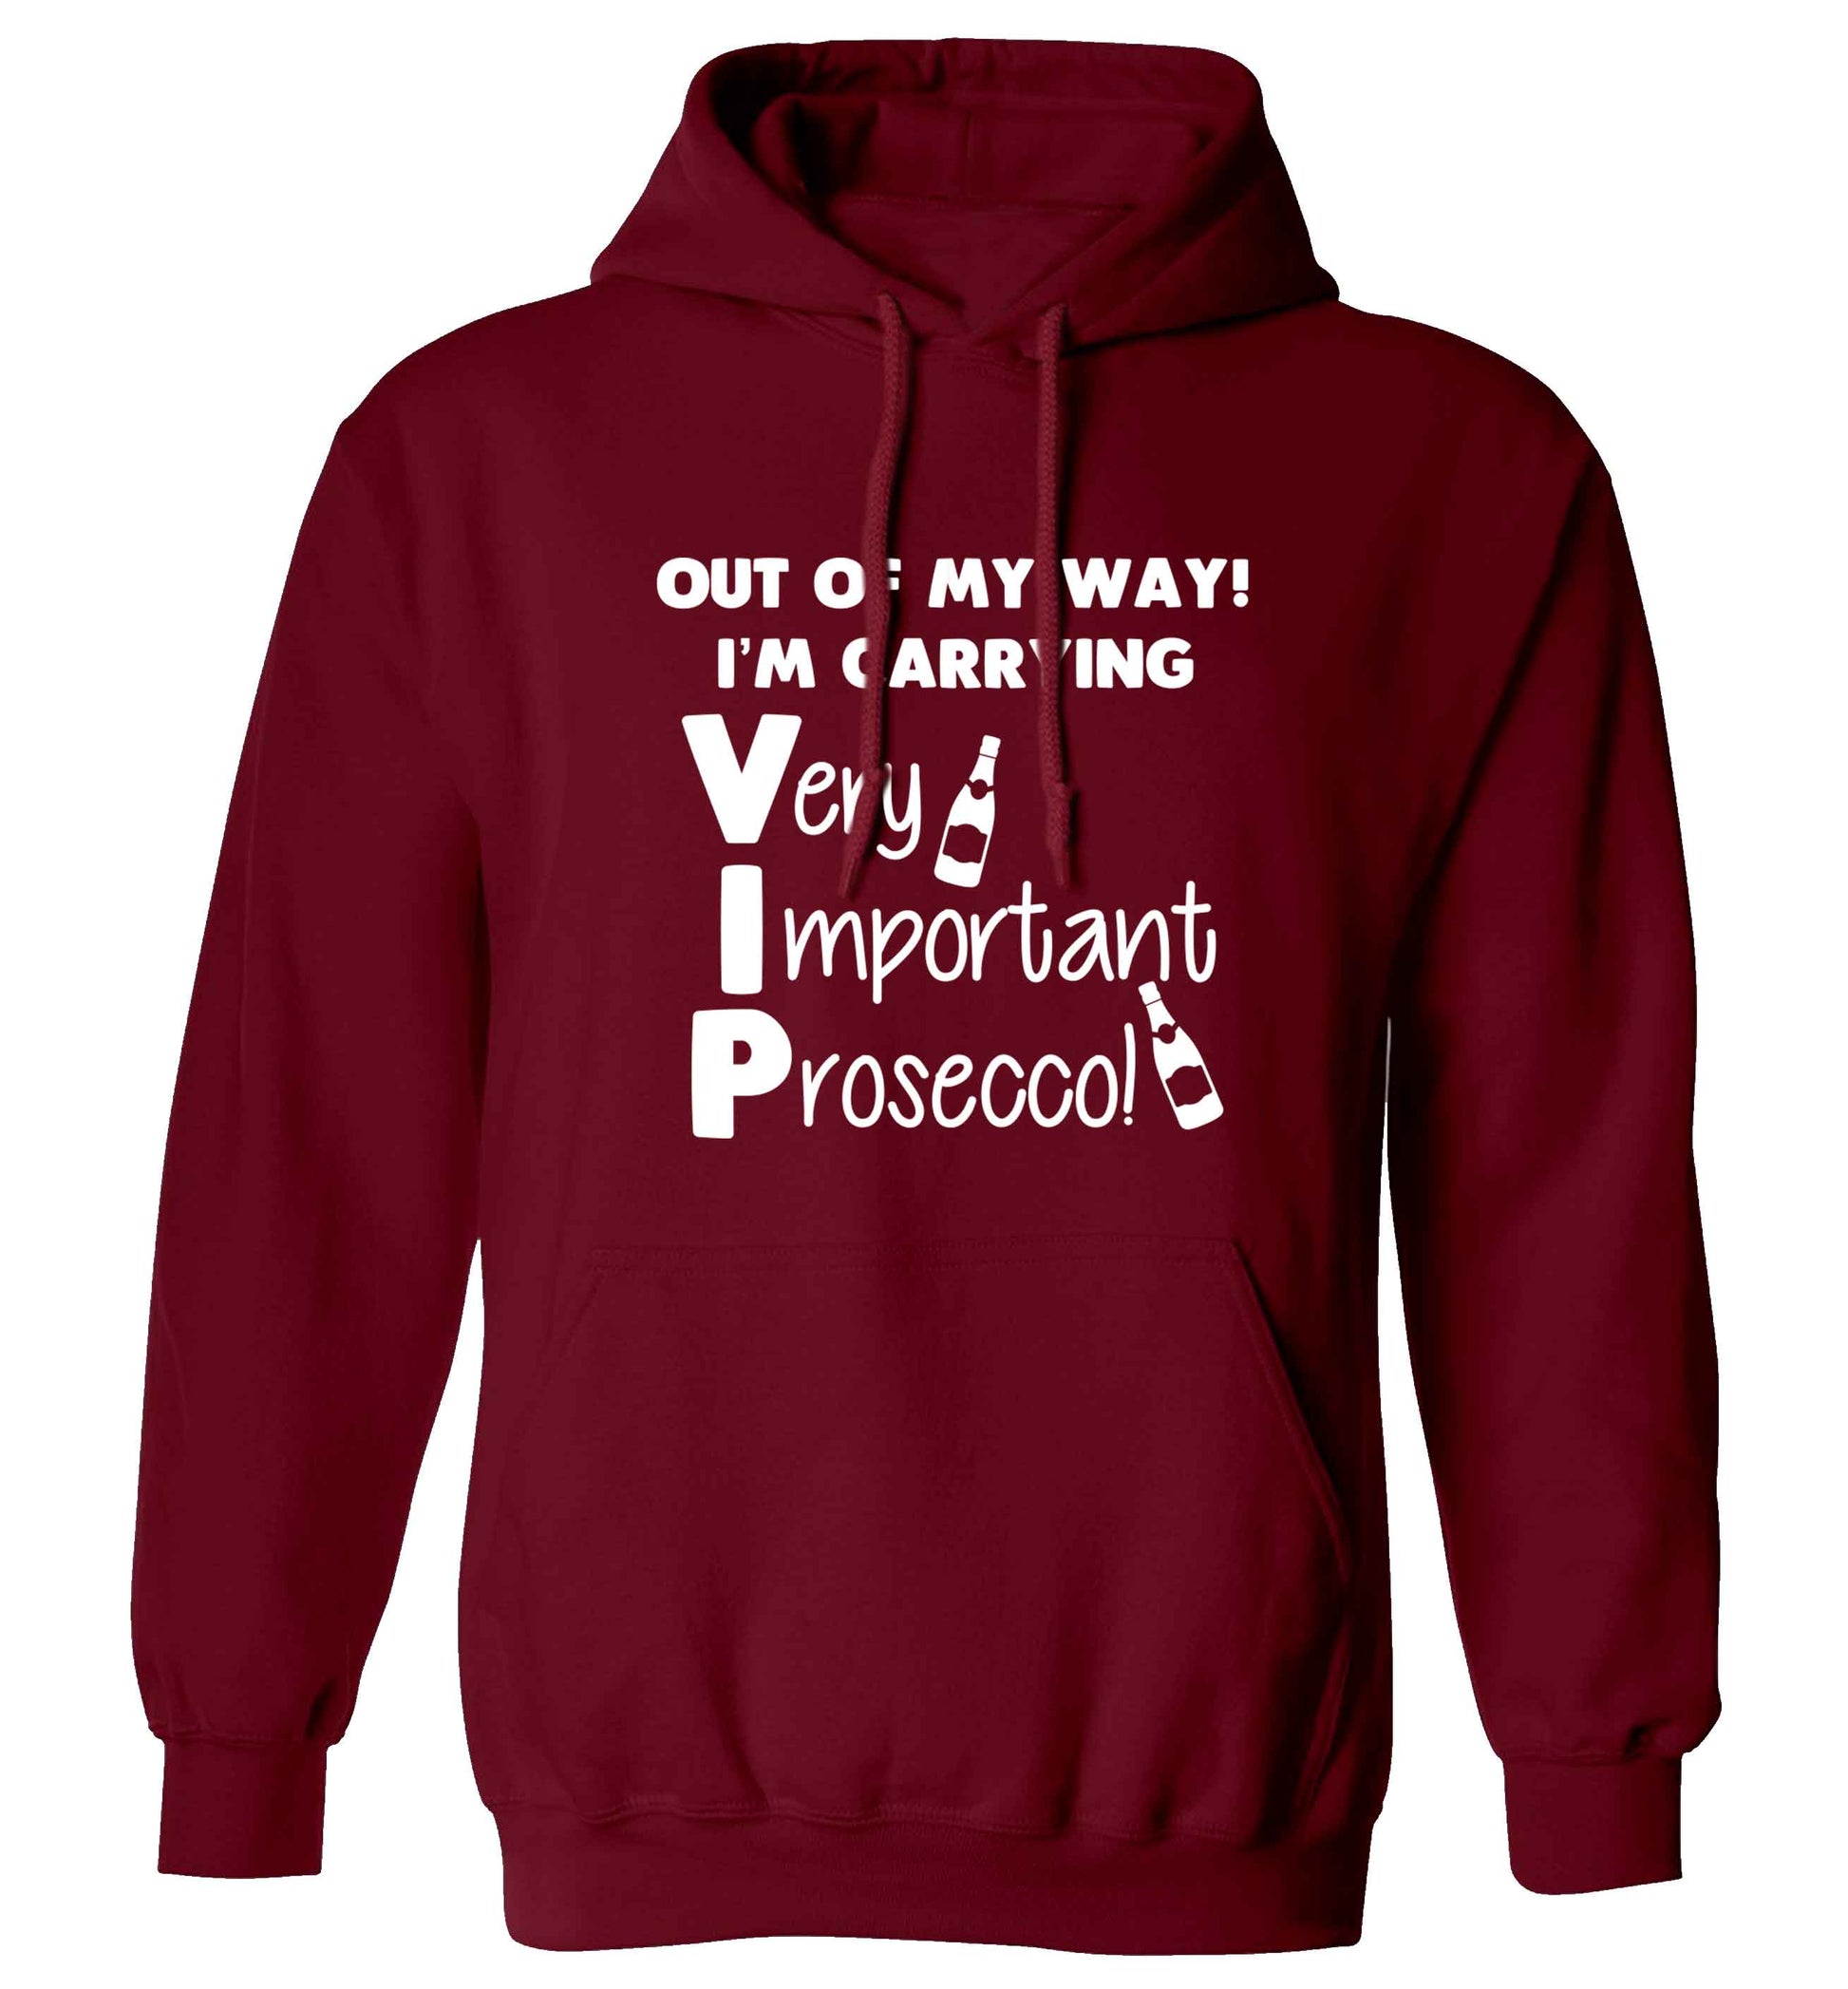 Out of my way I'm carrying very important prosecco! adults unisex maroon hoodie 2XL